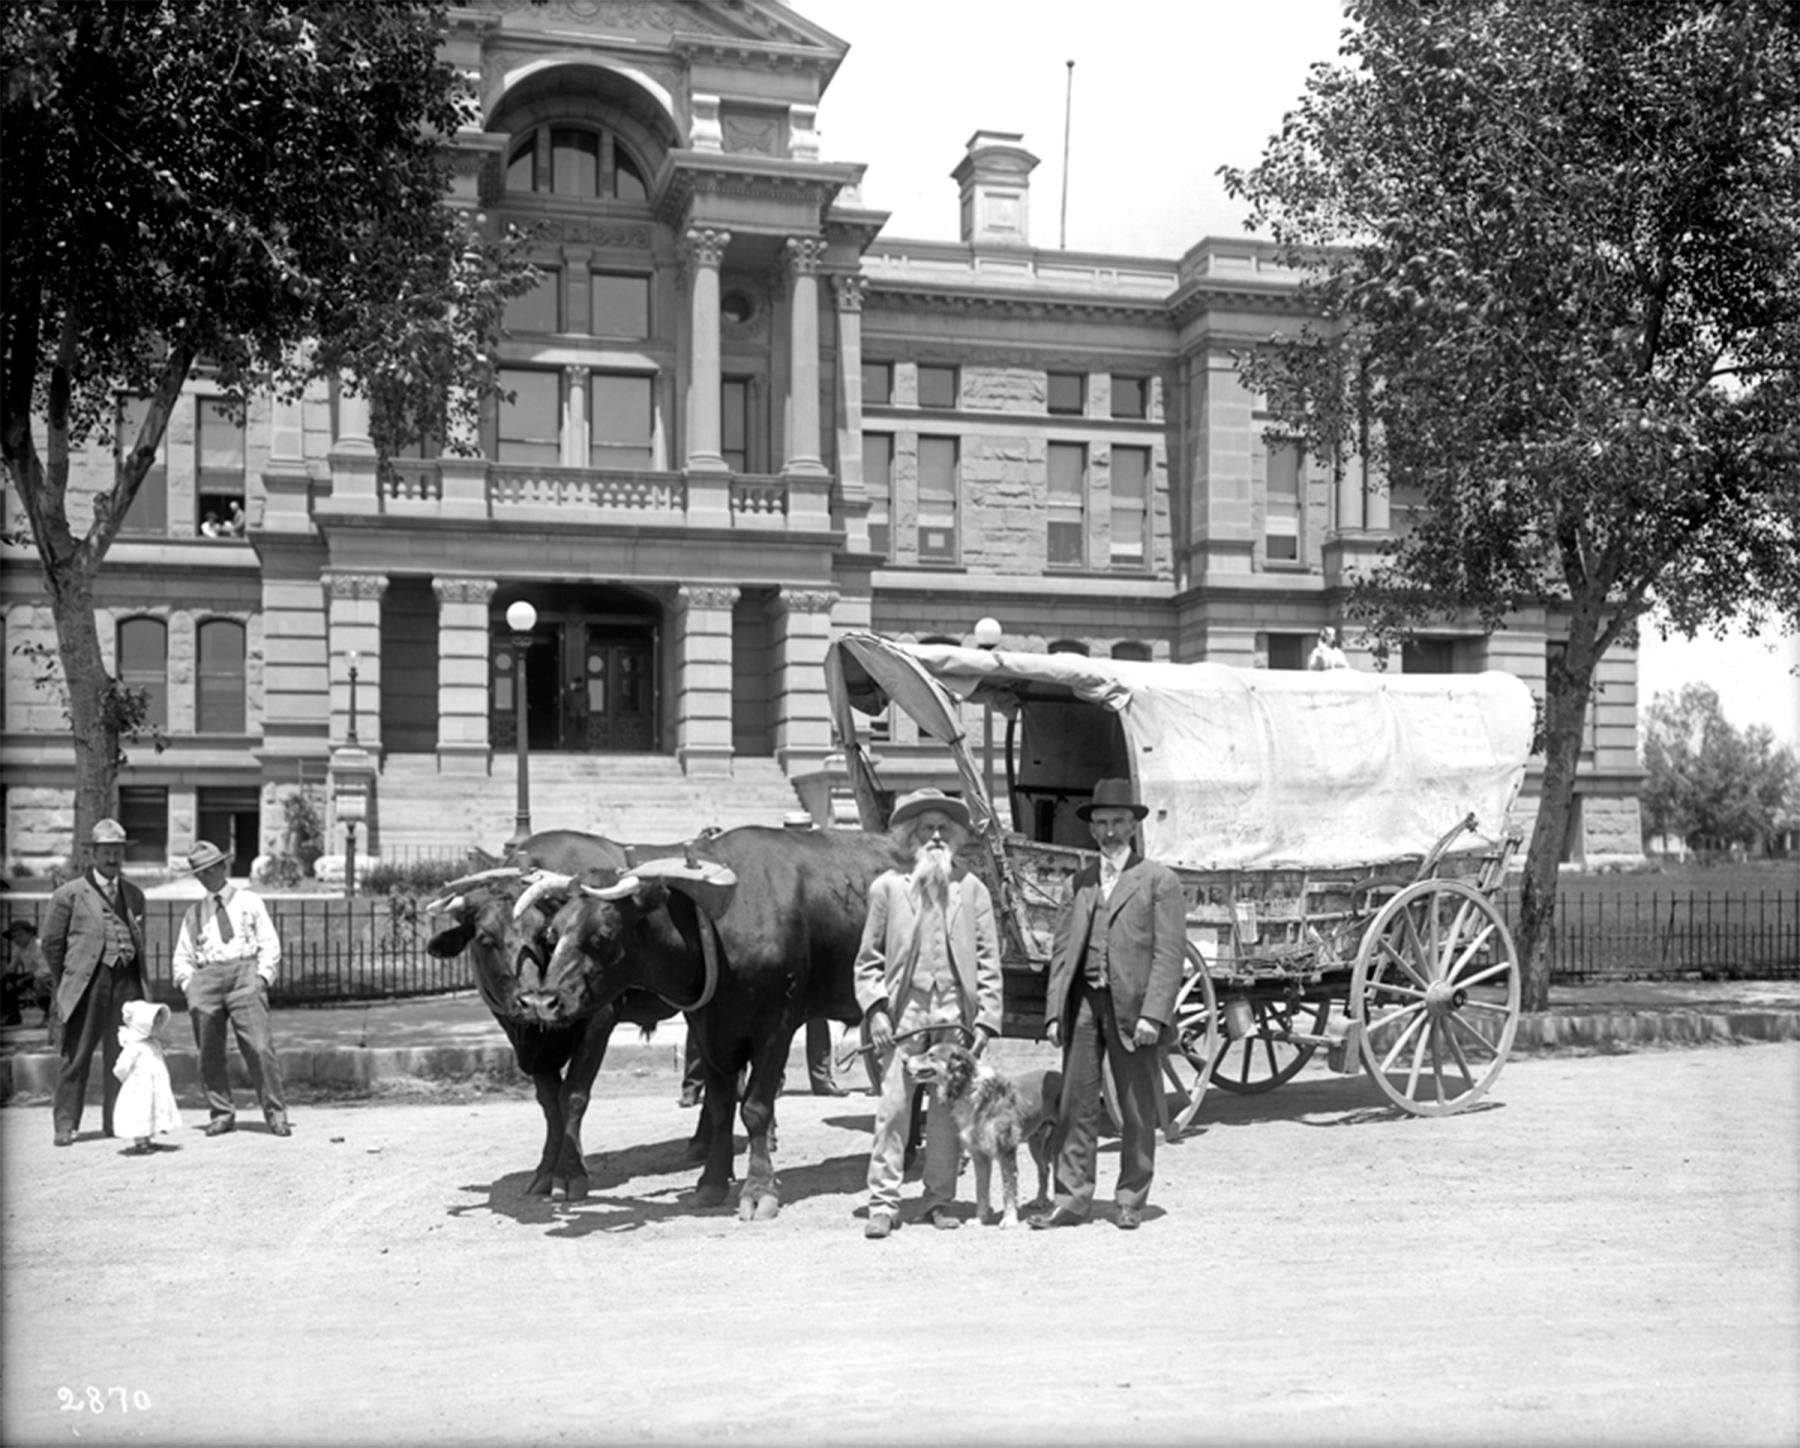 Late in life, Ezra Meeker crossed the continent four times—twice with wagon and ox team, once by automobile and once in a biplane. Here, with two other men and a small girl looking on, he meets with Wyoming Gov. B.B. Brooks outside the State Capitol, 1910. Simson photo, Wyoming State Archives. 